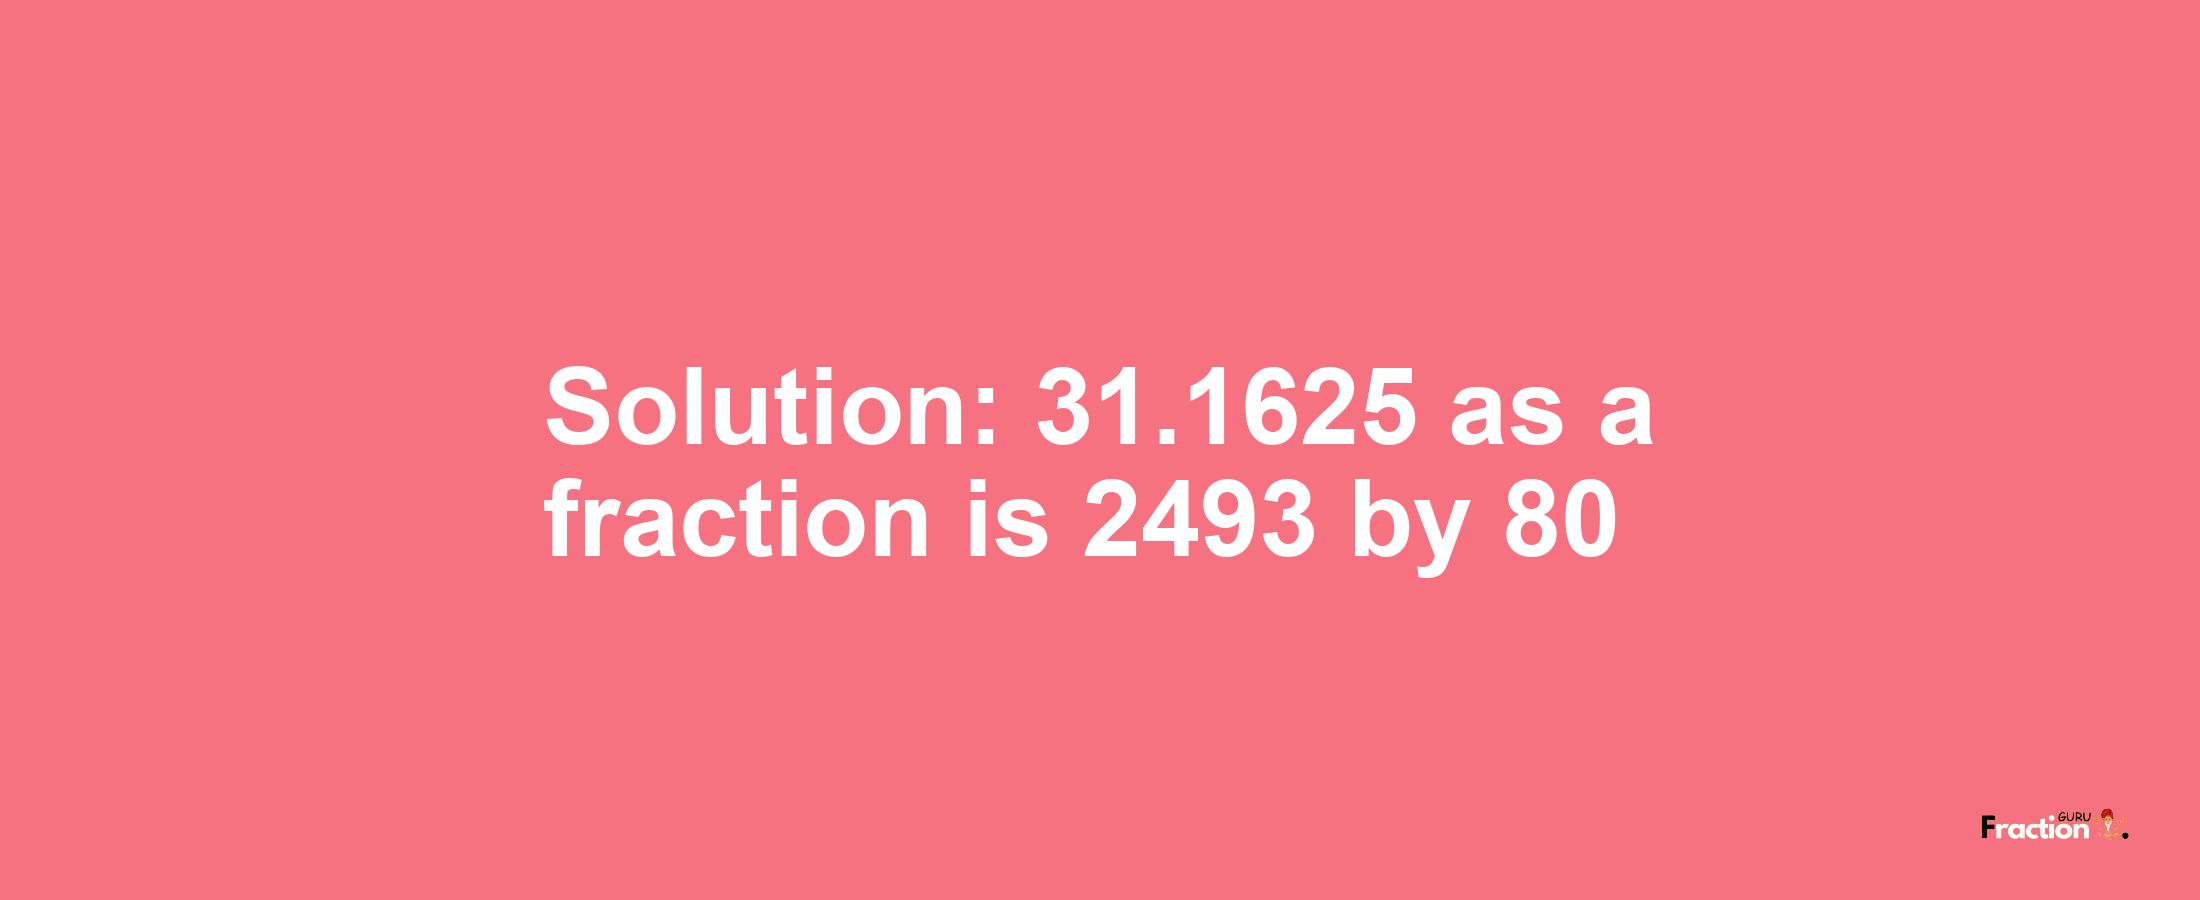 Solution:31.1625 as a fraction is 2493/80